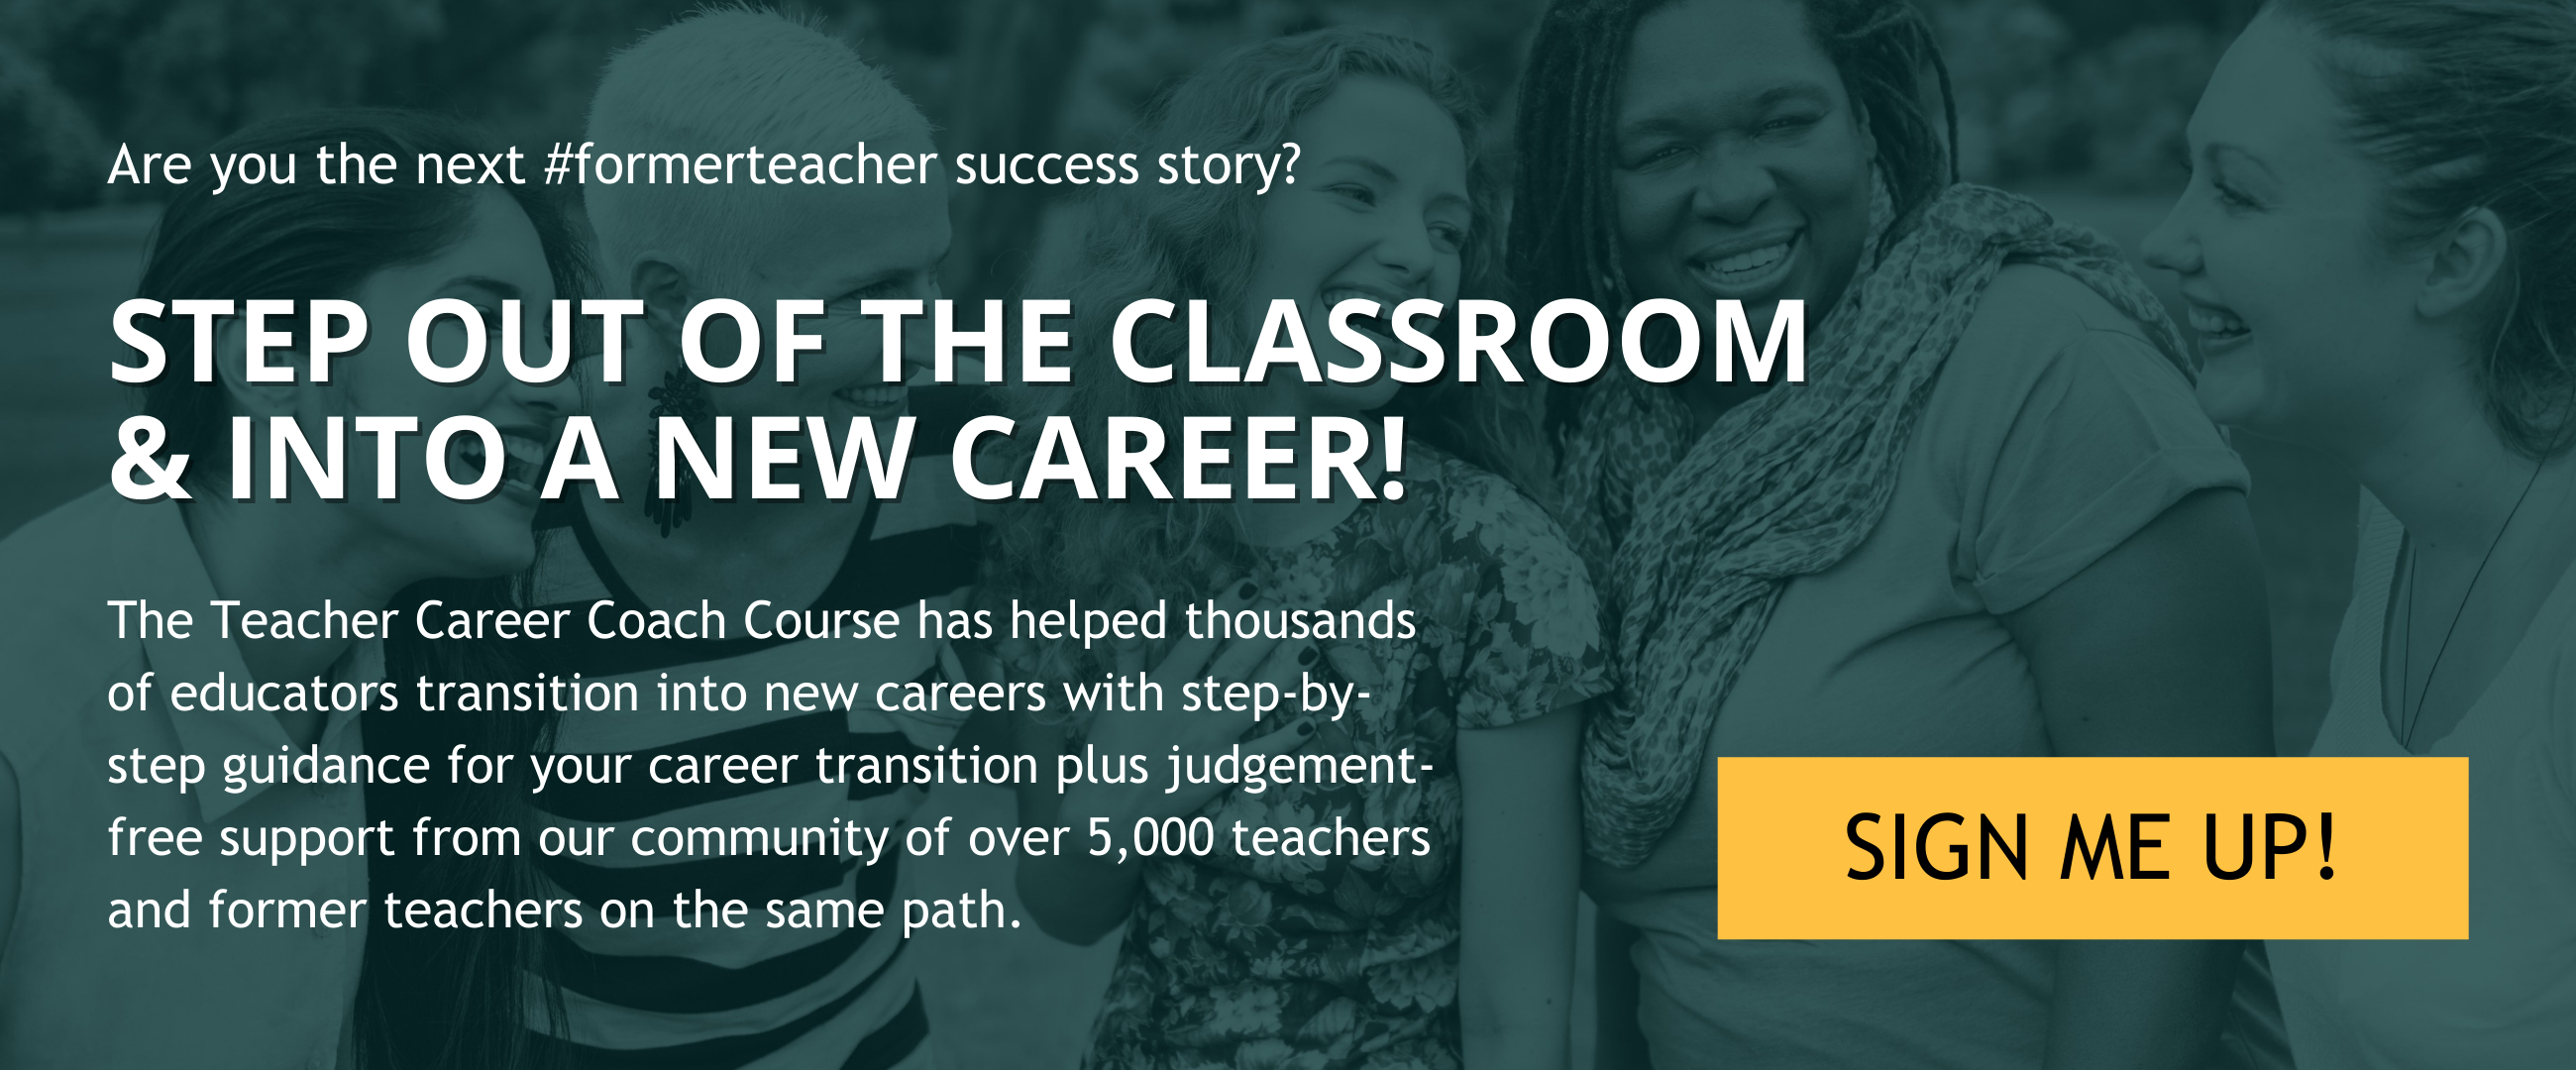 Step out of the classroom and into a new career, The Teacher Career Coach Course